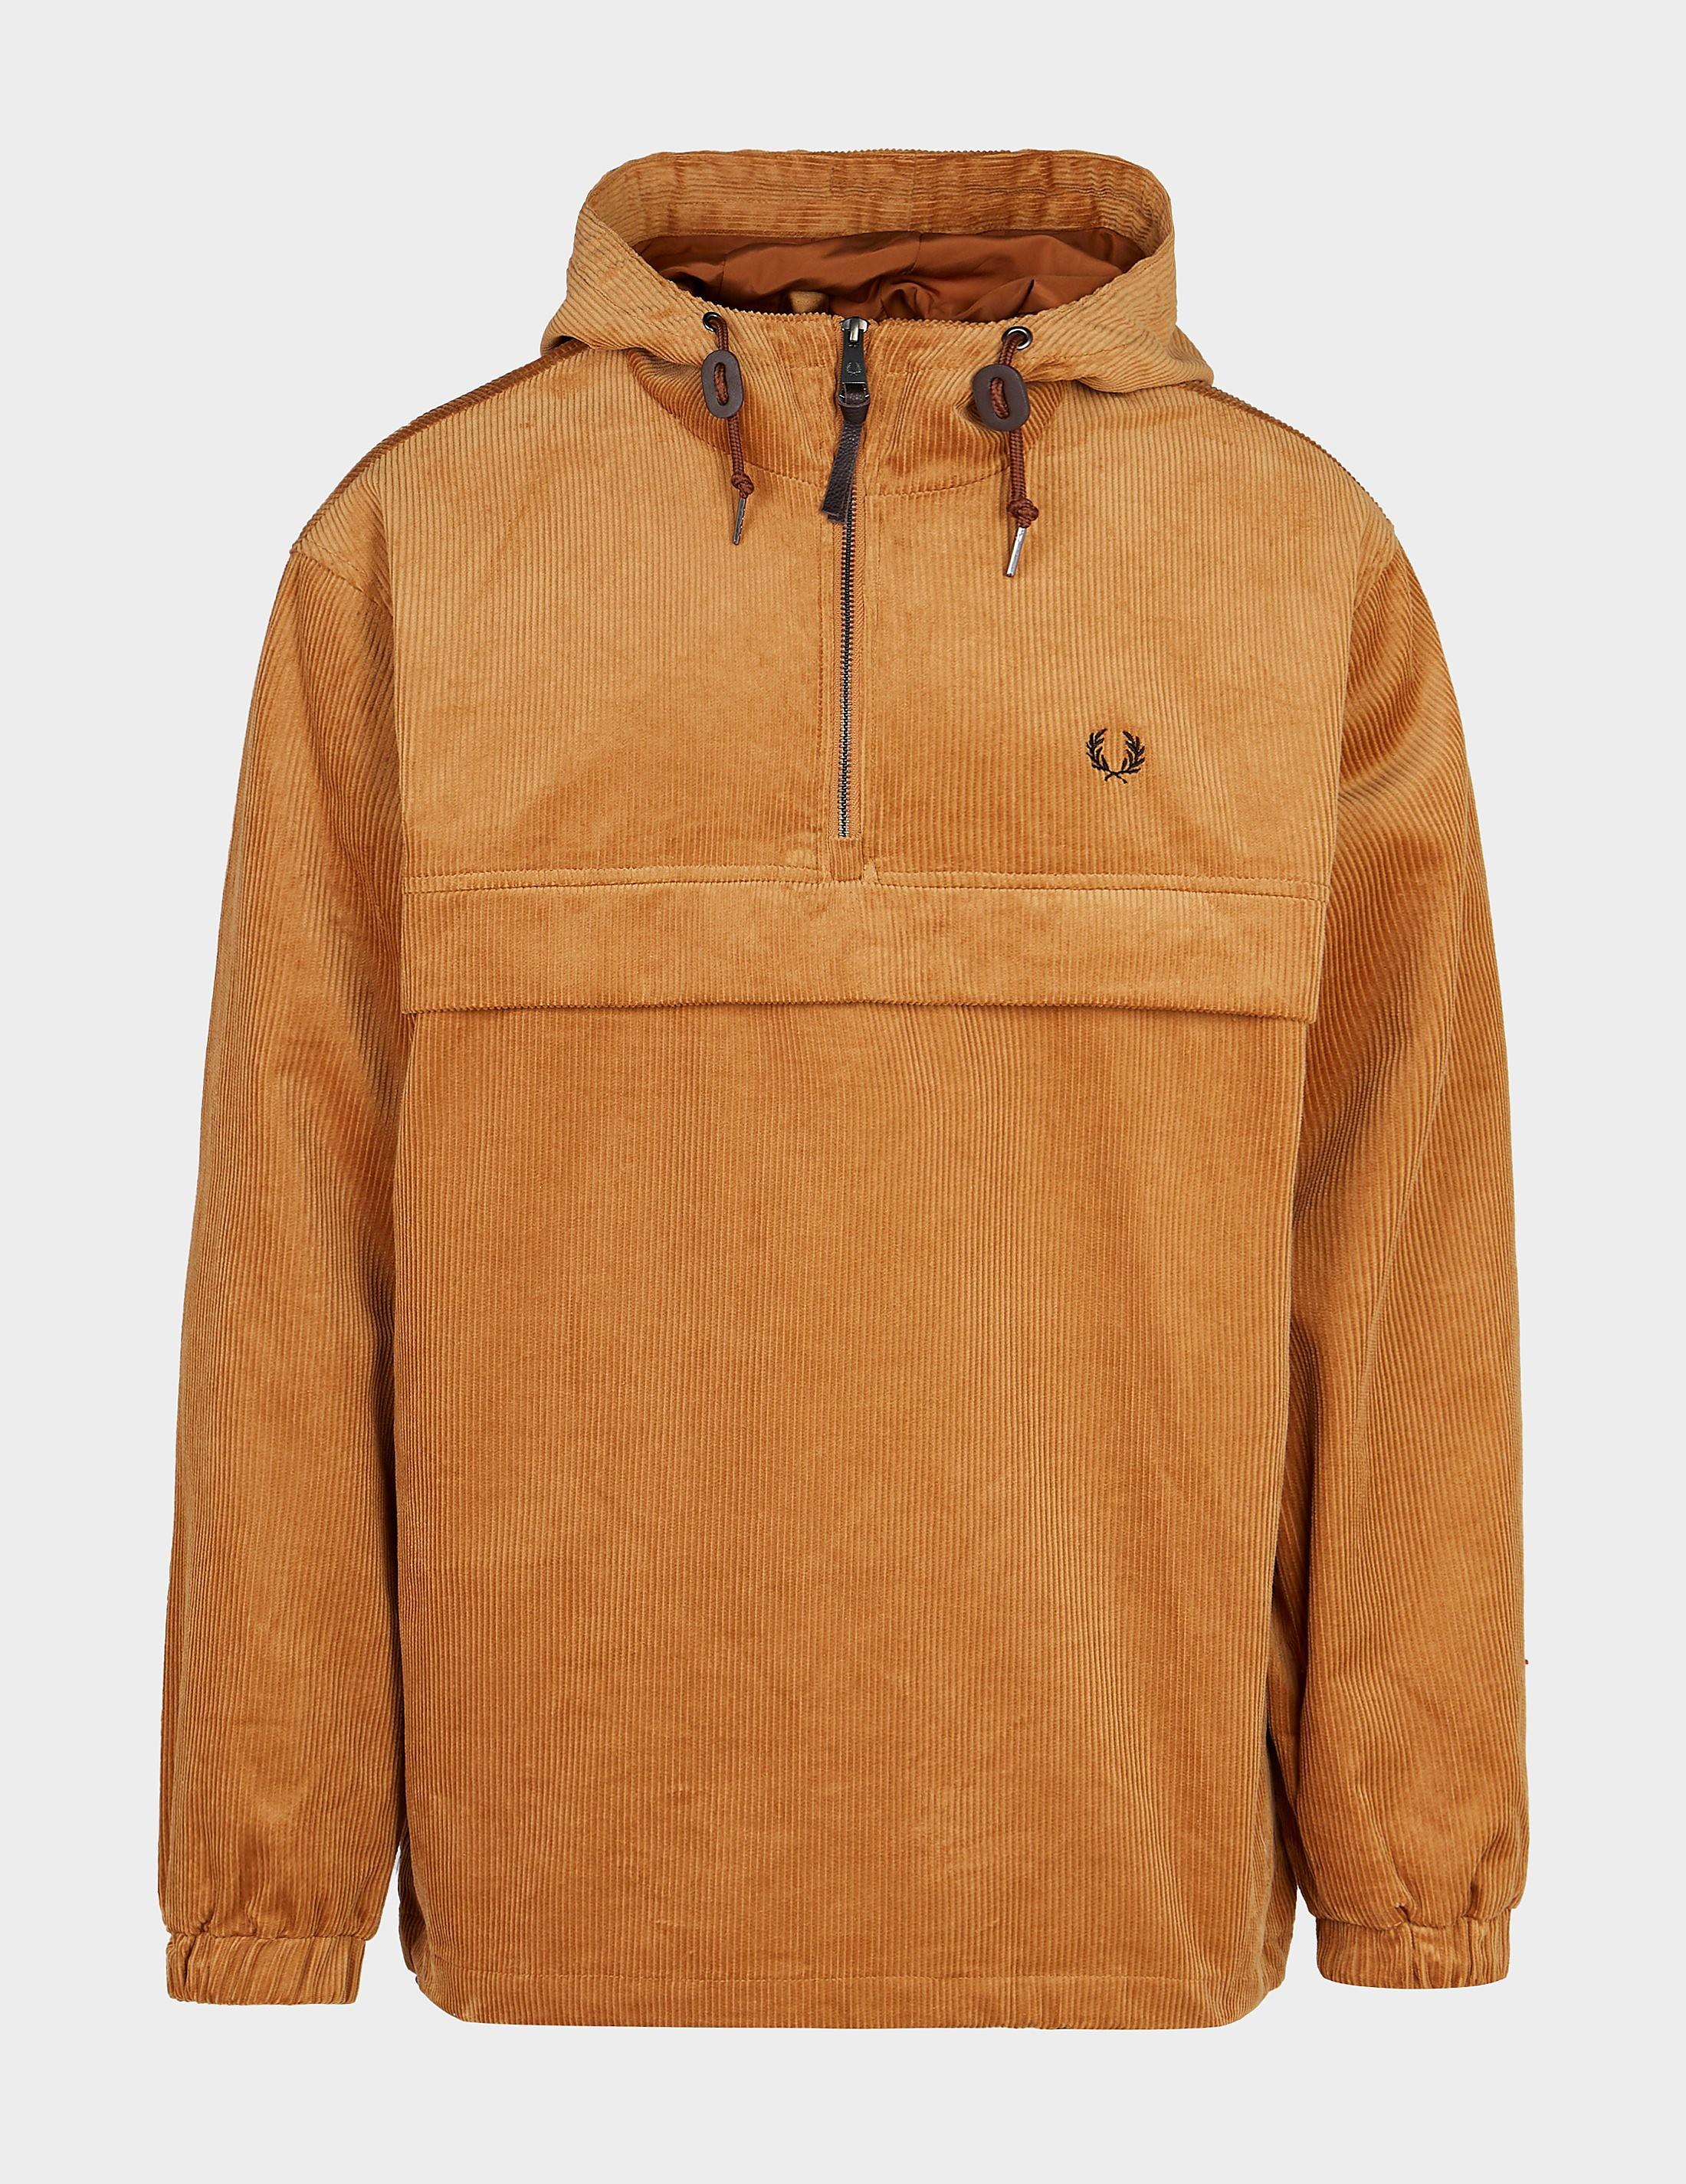 Bone marrow commit Prescribe Fred Perry Corduroy Overhead Jacket Brown for Men | Lyst